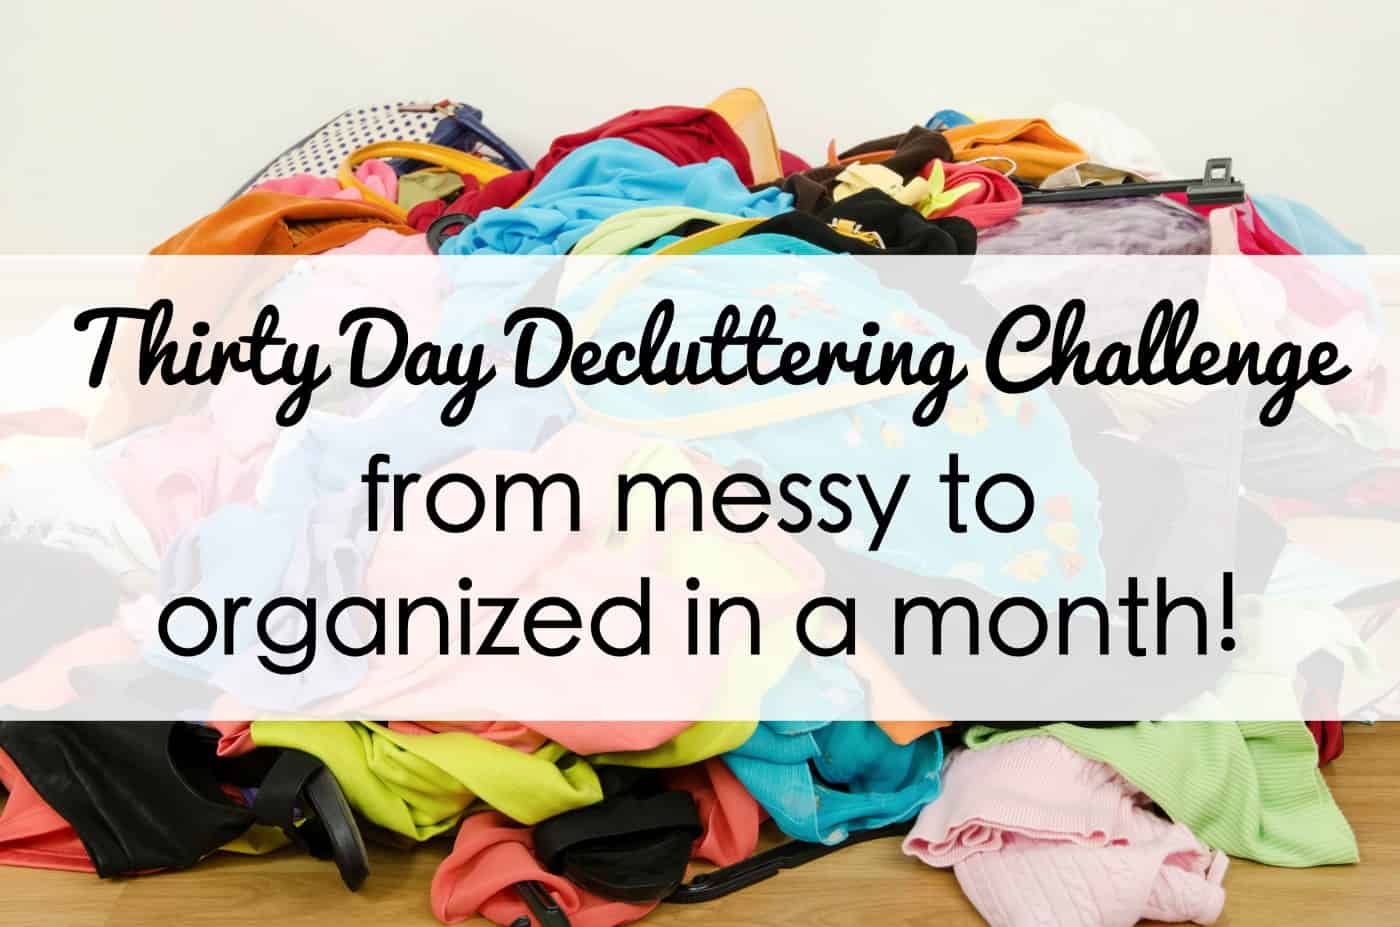 Declutter Your Home with This Easy 30-Day Challenge!